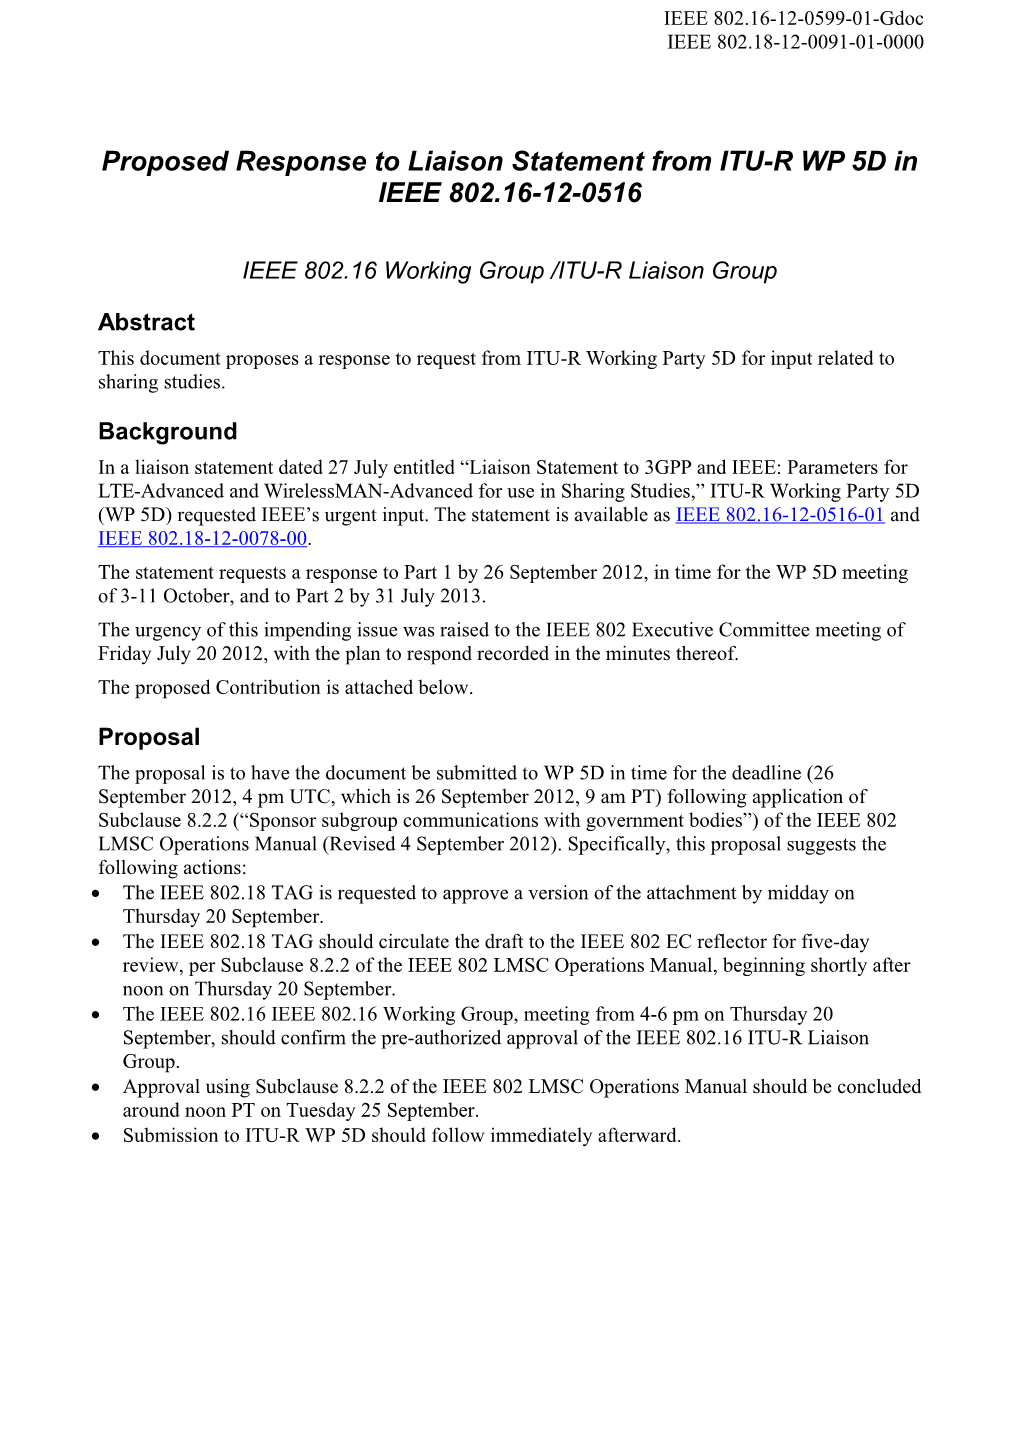 Proposed Response to Liaison Statement from ITU-R WP 5D in IEEE 802.16-12-0516